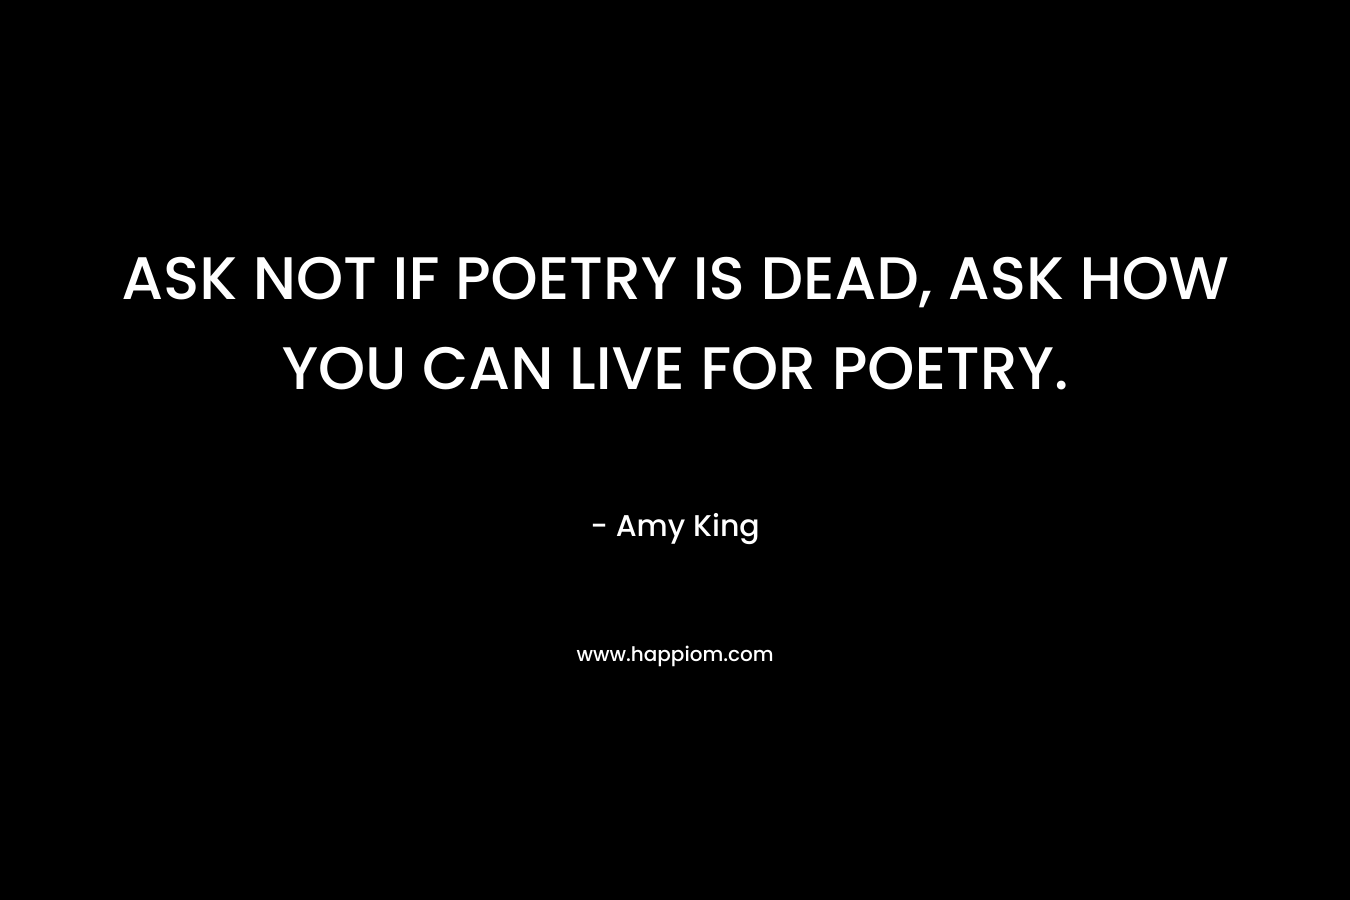 ASK NOT IF POETRY IS DEAD, ASK HOW YOU CAN LIVE FOR POETRY. – Amy King